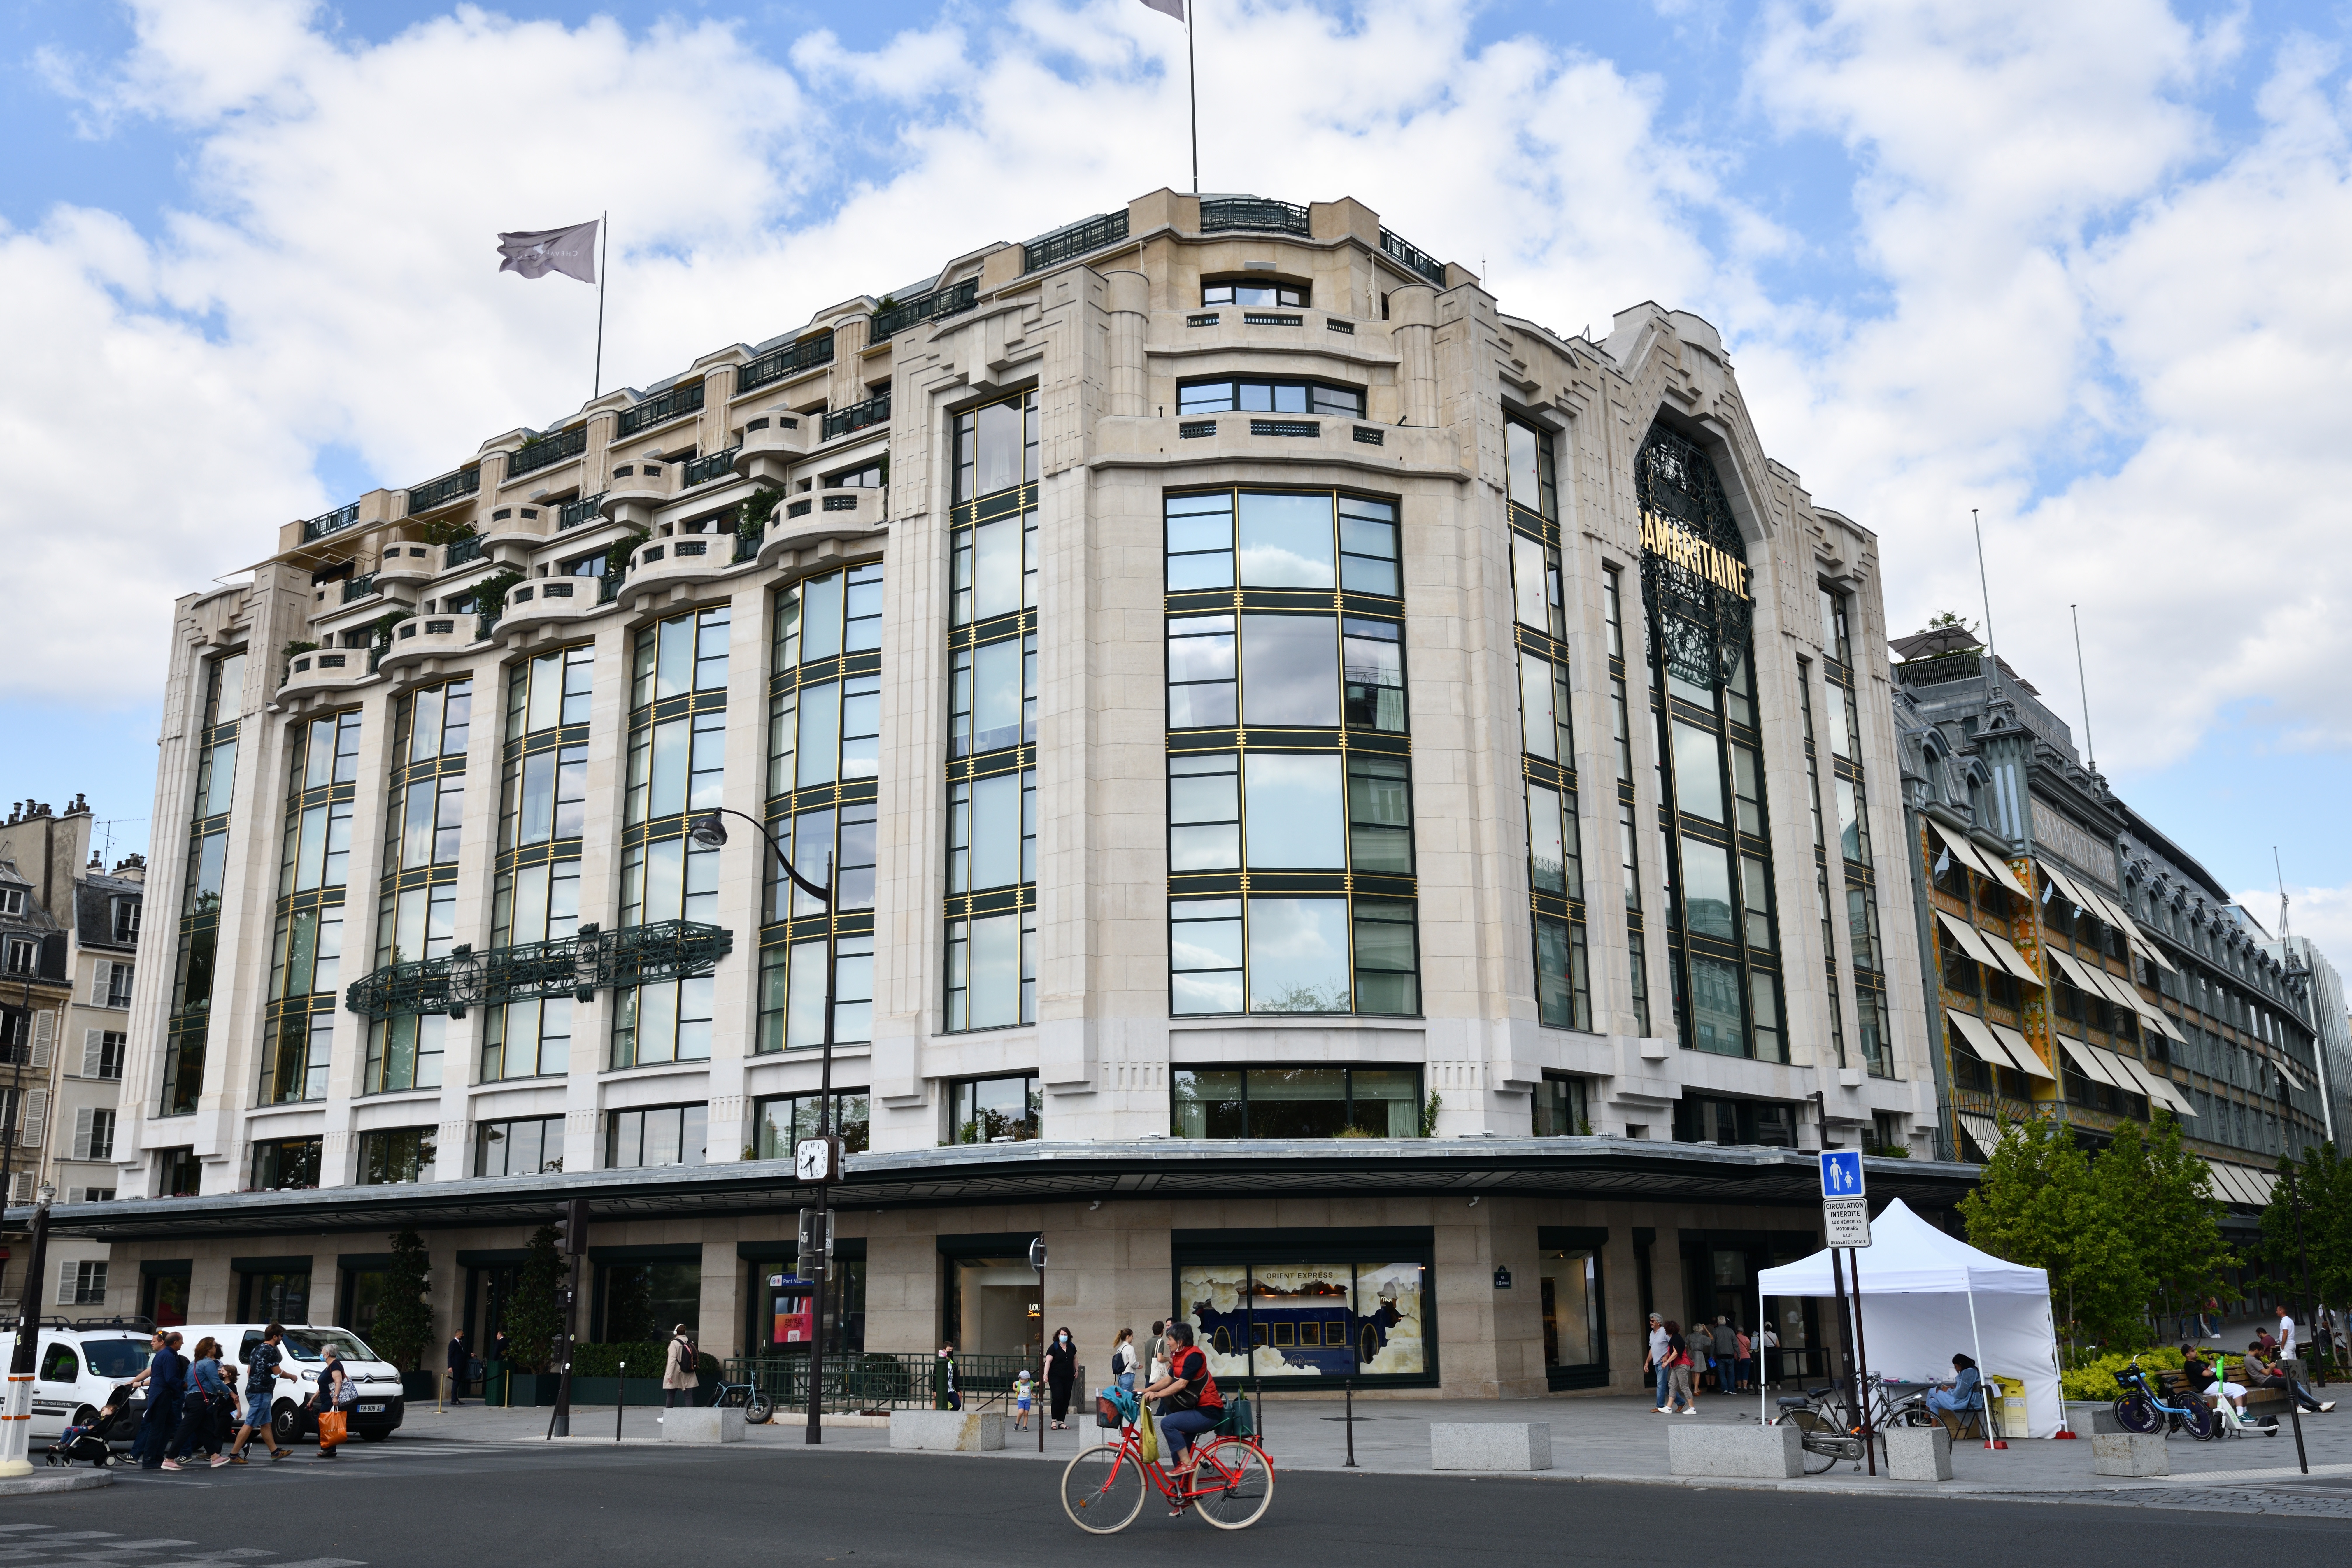 Florasis’ first counter in Europe will land at LVMH-owned Samaritaine Paris Pont-Neuf. Image: Getty Images